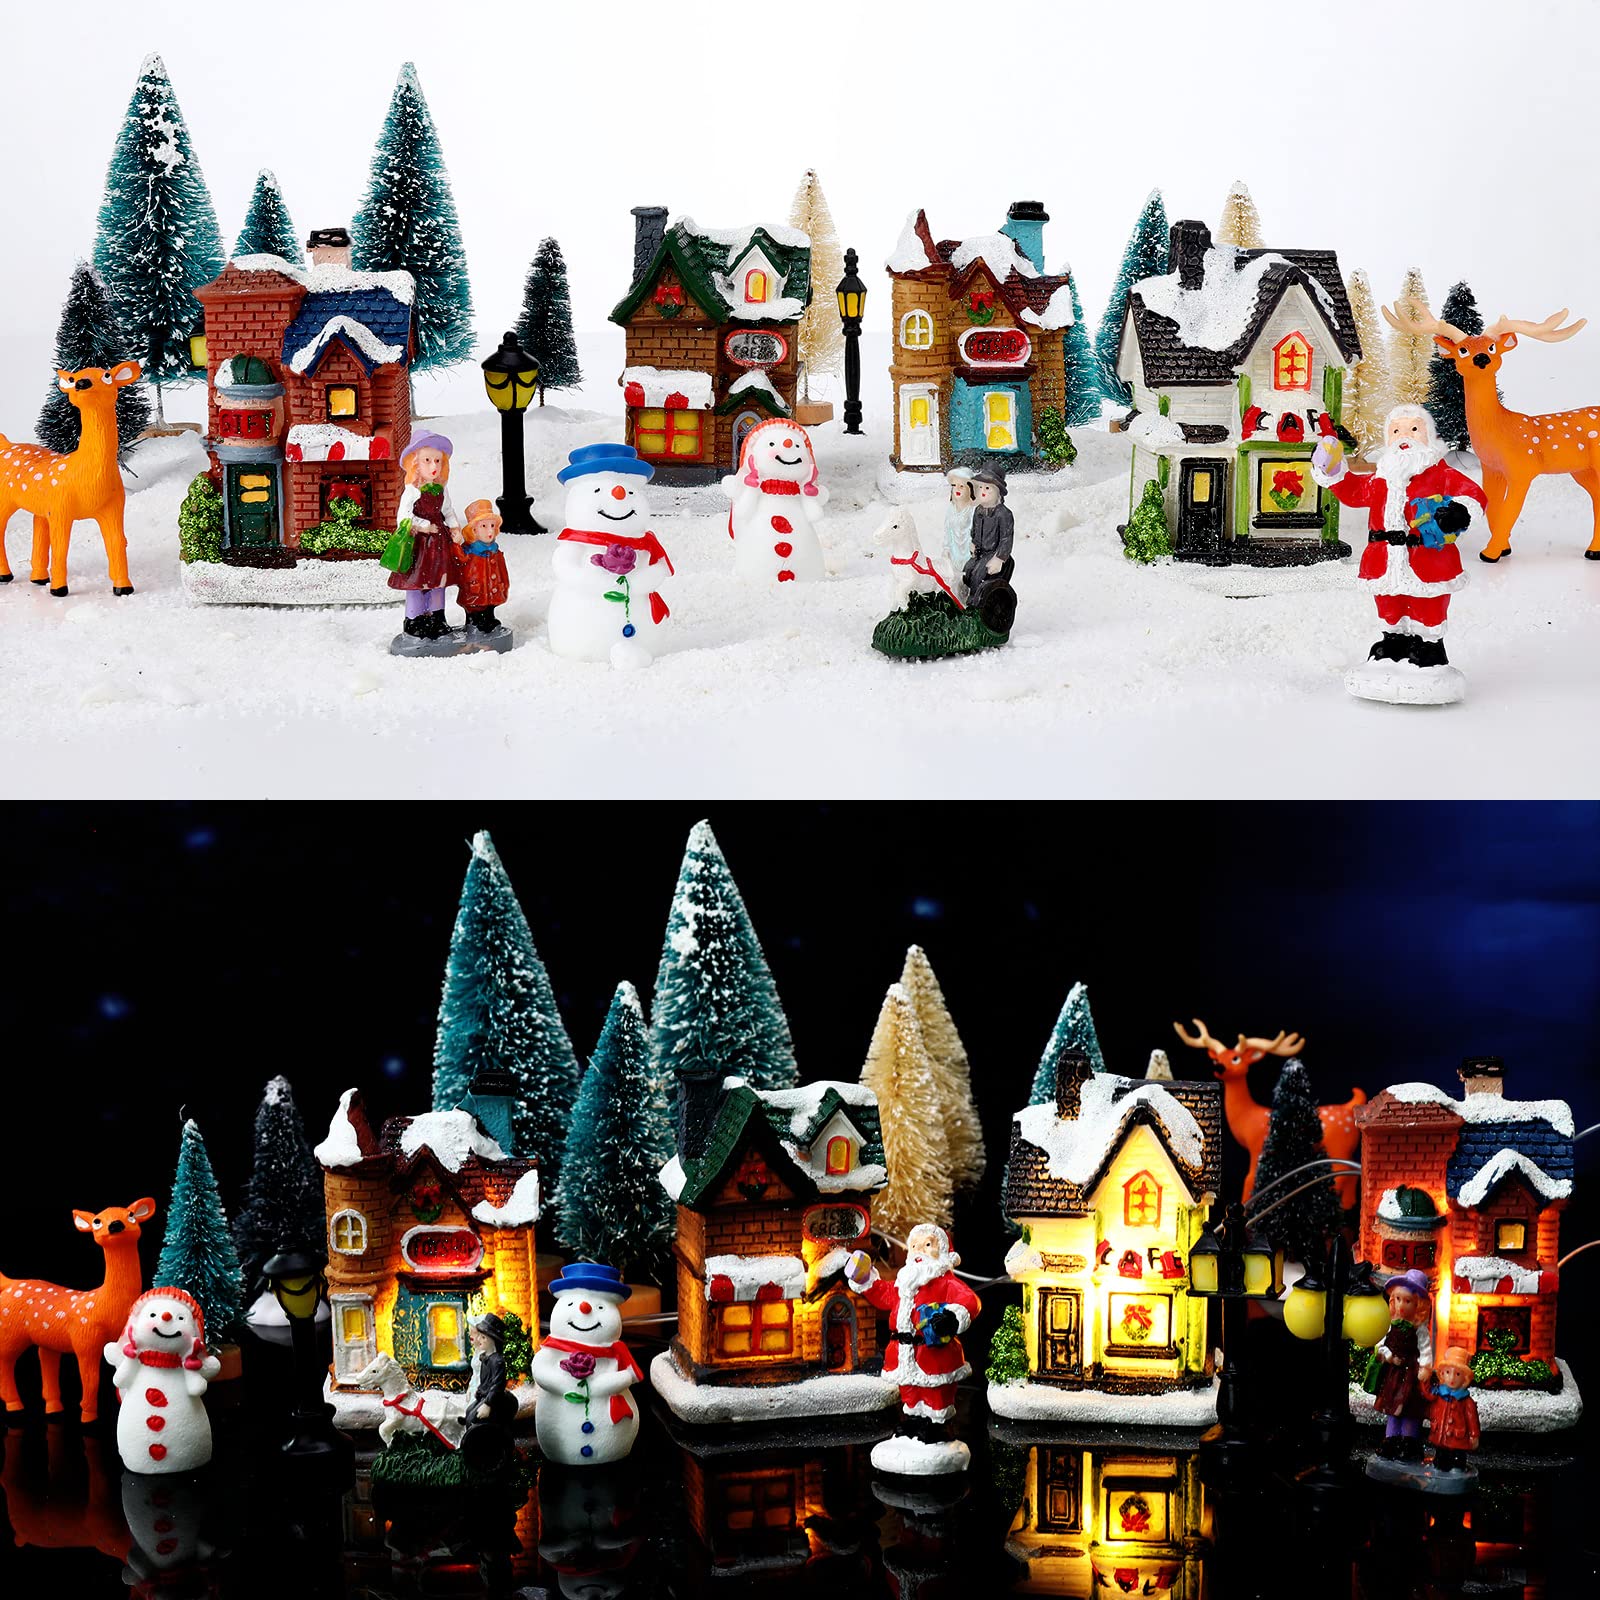 Complete christmas village decoration set to make a charming holiday town display